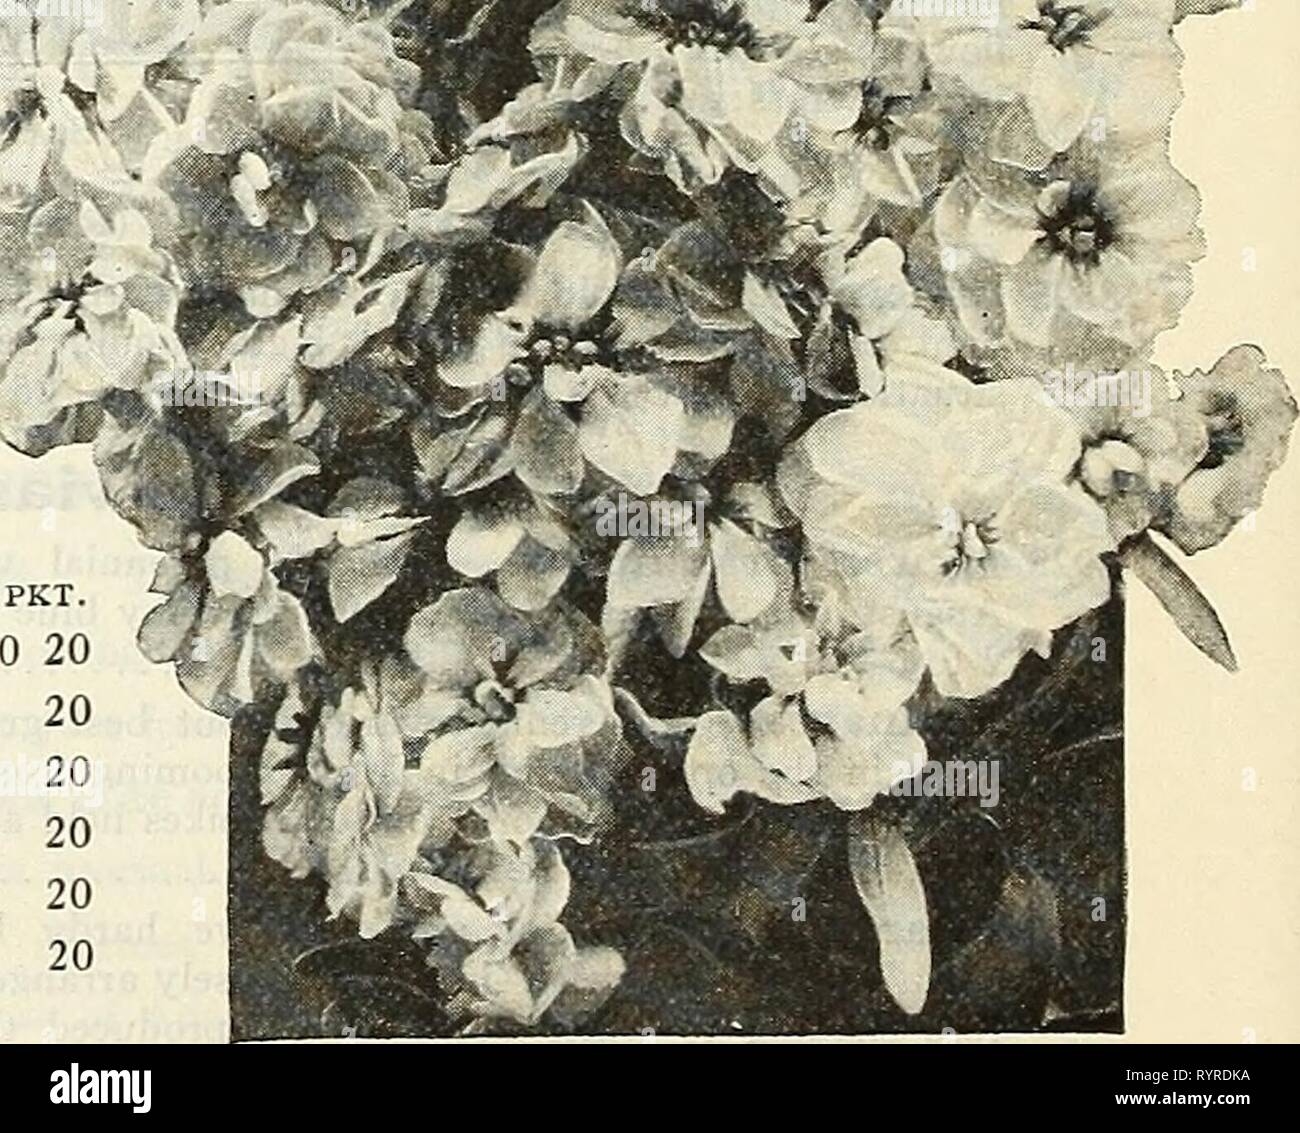 Dreer's midsummer list 1927 (1927) Dreer's midsummer list 1927 . dreersmidsummerl1927henr Year: 1927  4000 Mixed. Containing Schizanthus Dwarf Large-Flowered manv sorts 10 Cut-and-Come- Again Stocks Splendid perpetual-blooming class; they throw out numerous side branches, ^L all bearing very double, fragrant flowers. wm&B Jm Â¥9 Â» I '*â¢â For winter and early spring blooming in I iSft^fe^Sit'' ' '']ft!8'T*' a cool greenhouse they are invaluable. Seed may be shown any time during the , , .... Statice Latifolia summer or early autumn, blooming in . ^j^ about 12 weeks time. per pkt. M^^au 4031 Stock Photo